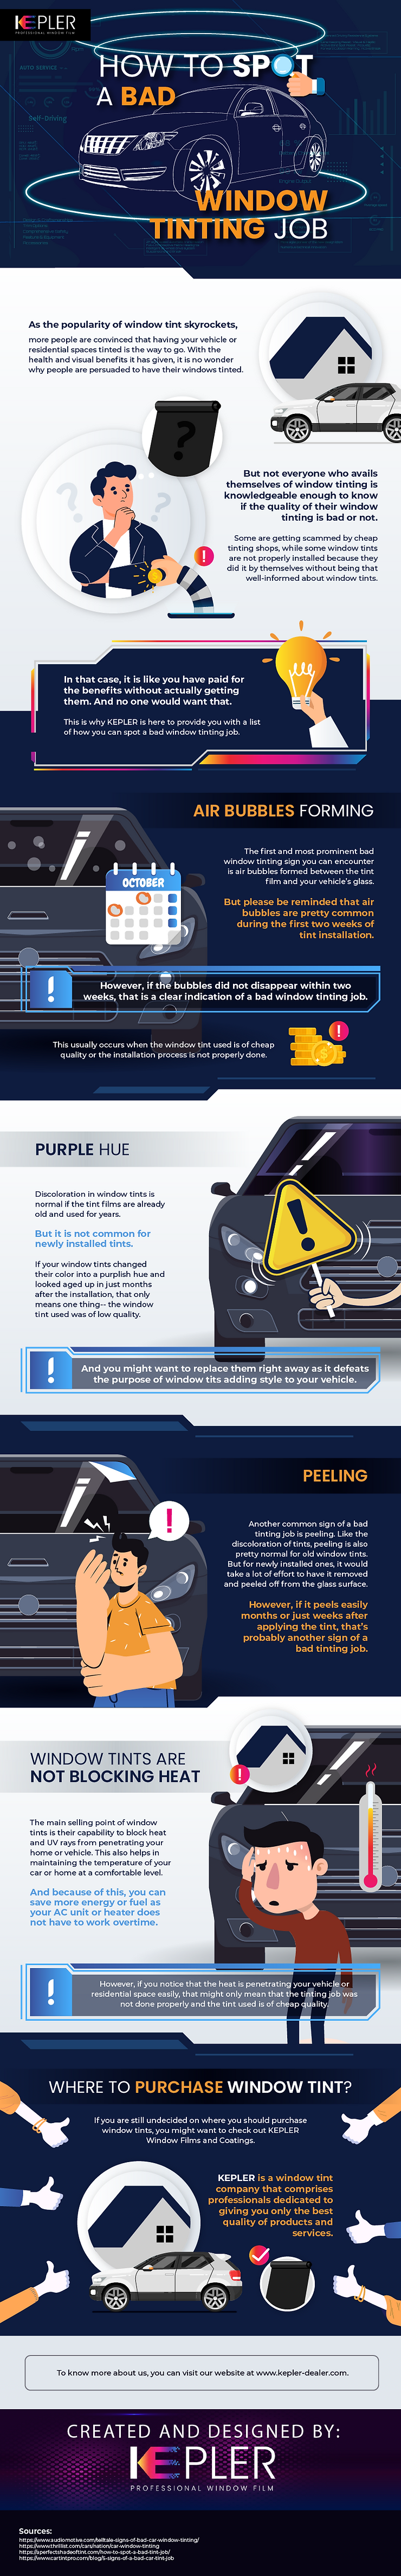 How To Spot A Bad Window Tinting Job - Infographic